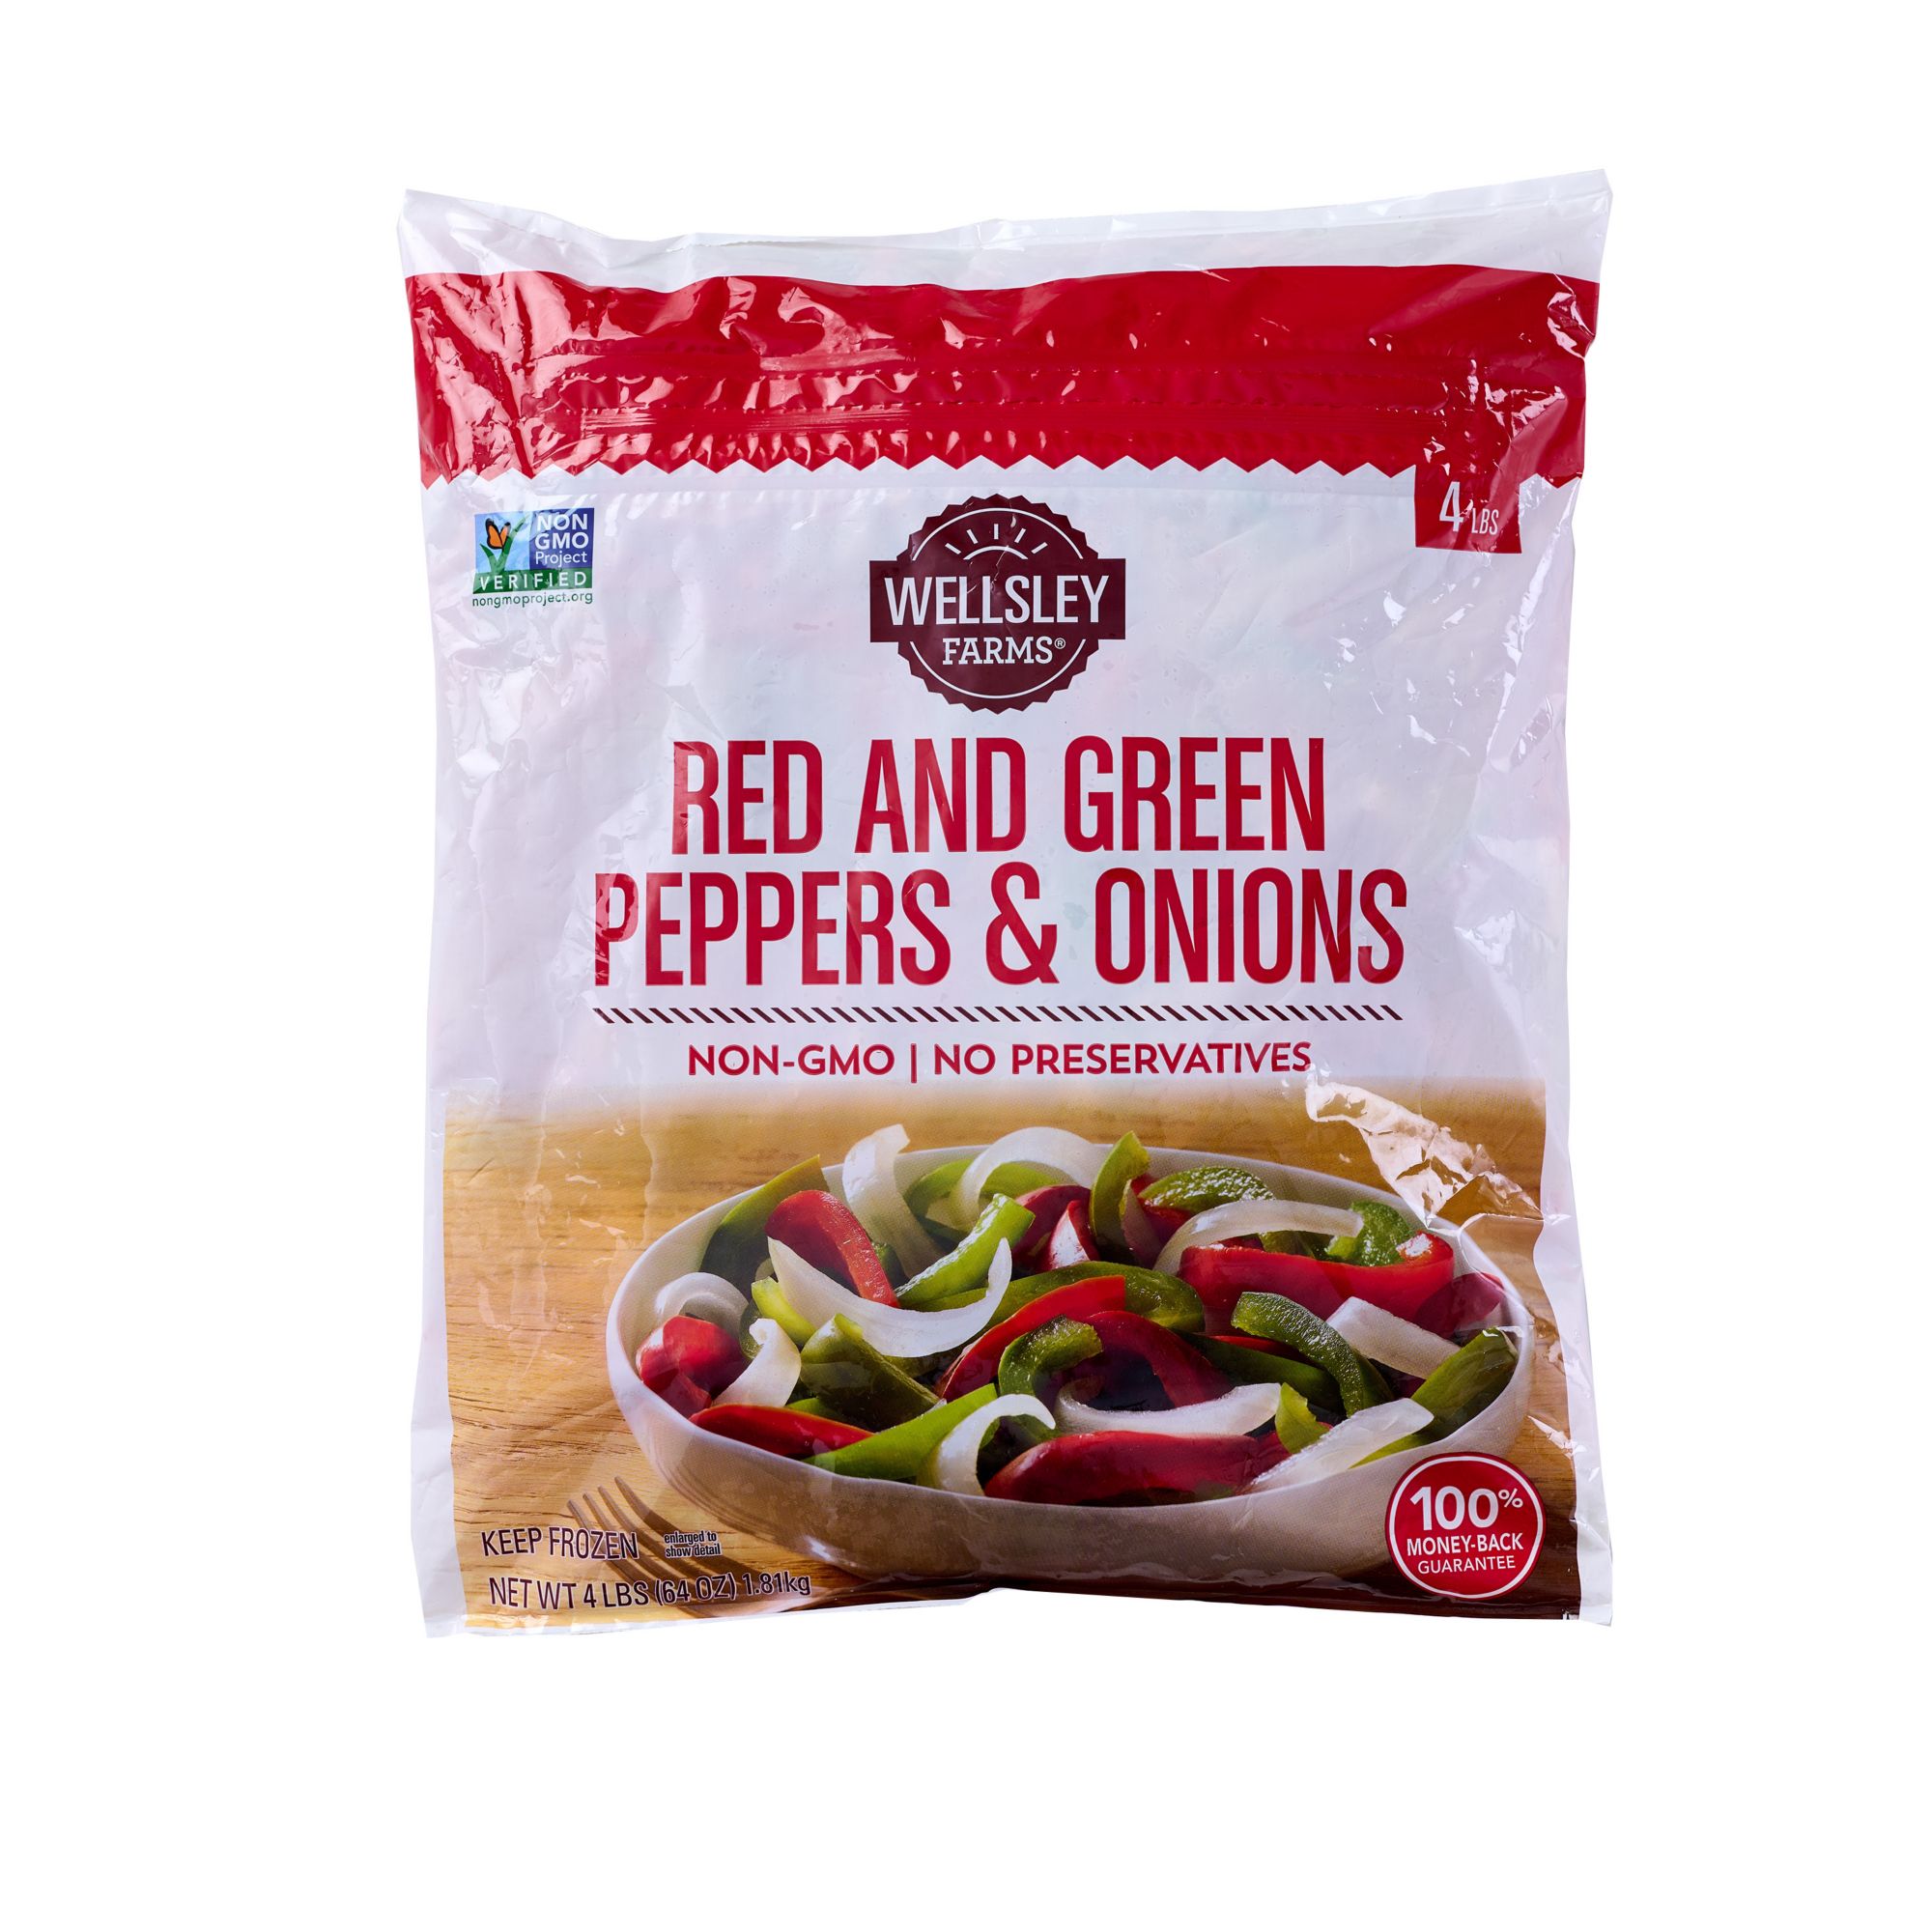 Wellsley Farms Red and Green Peppers & Onions